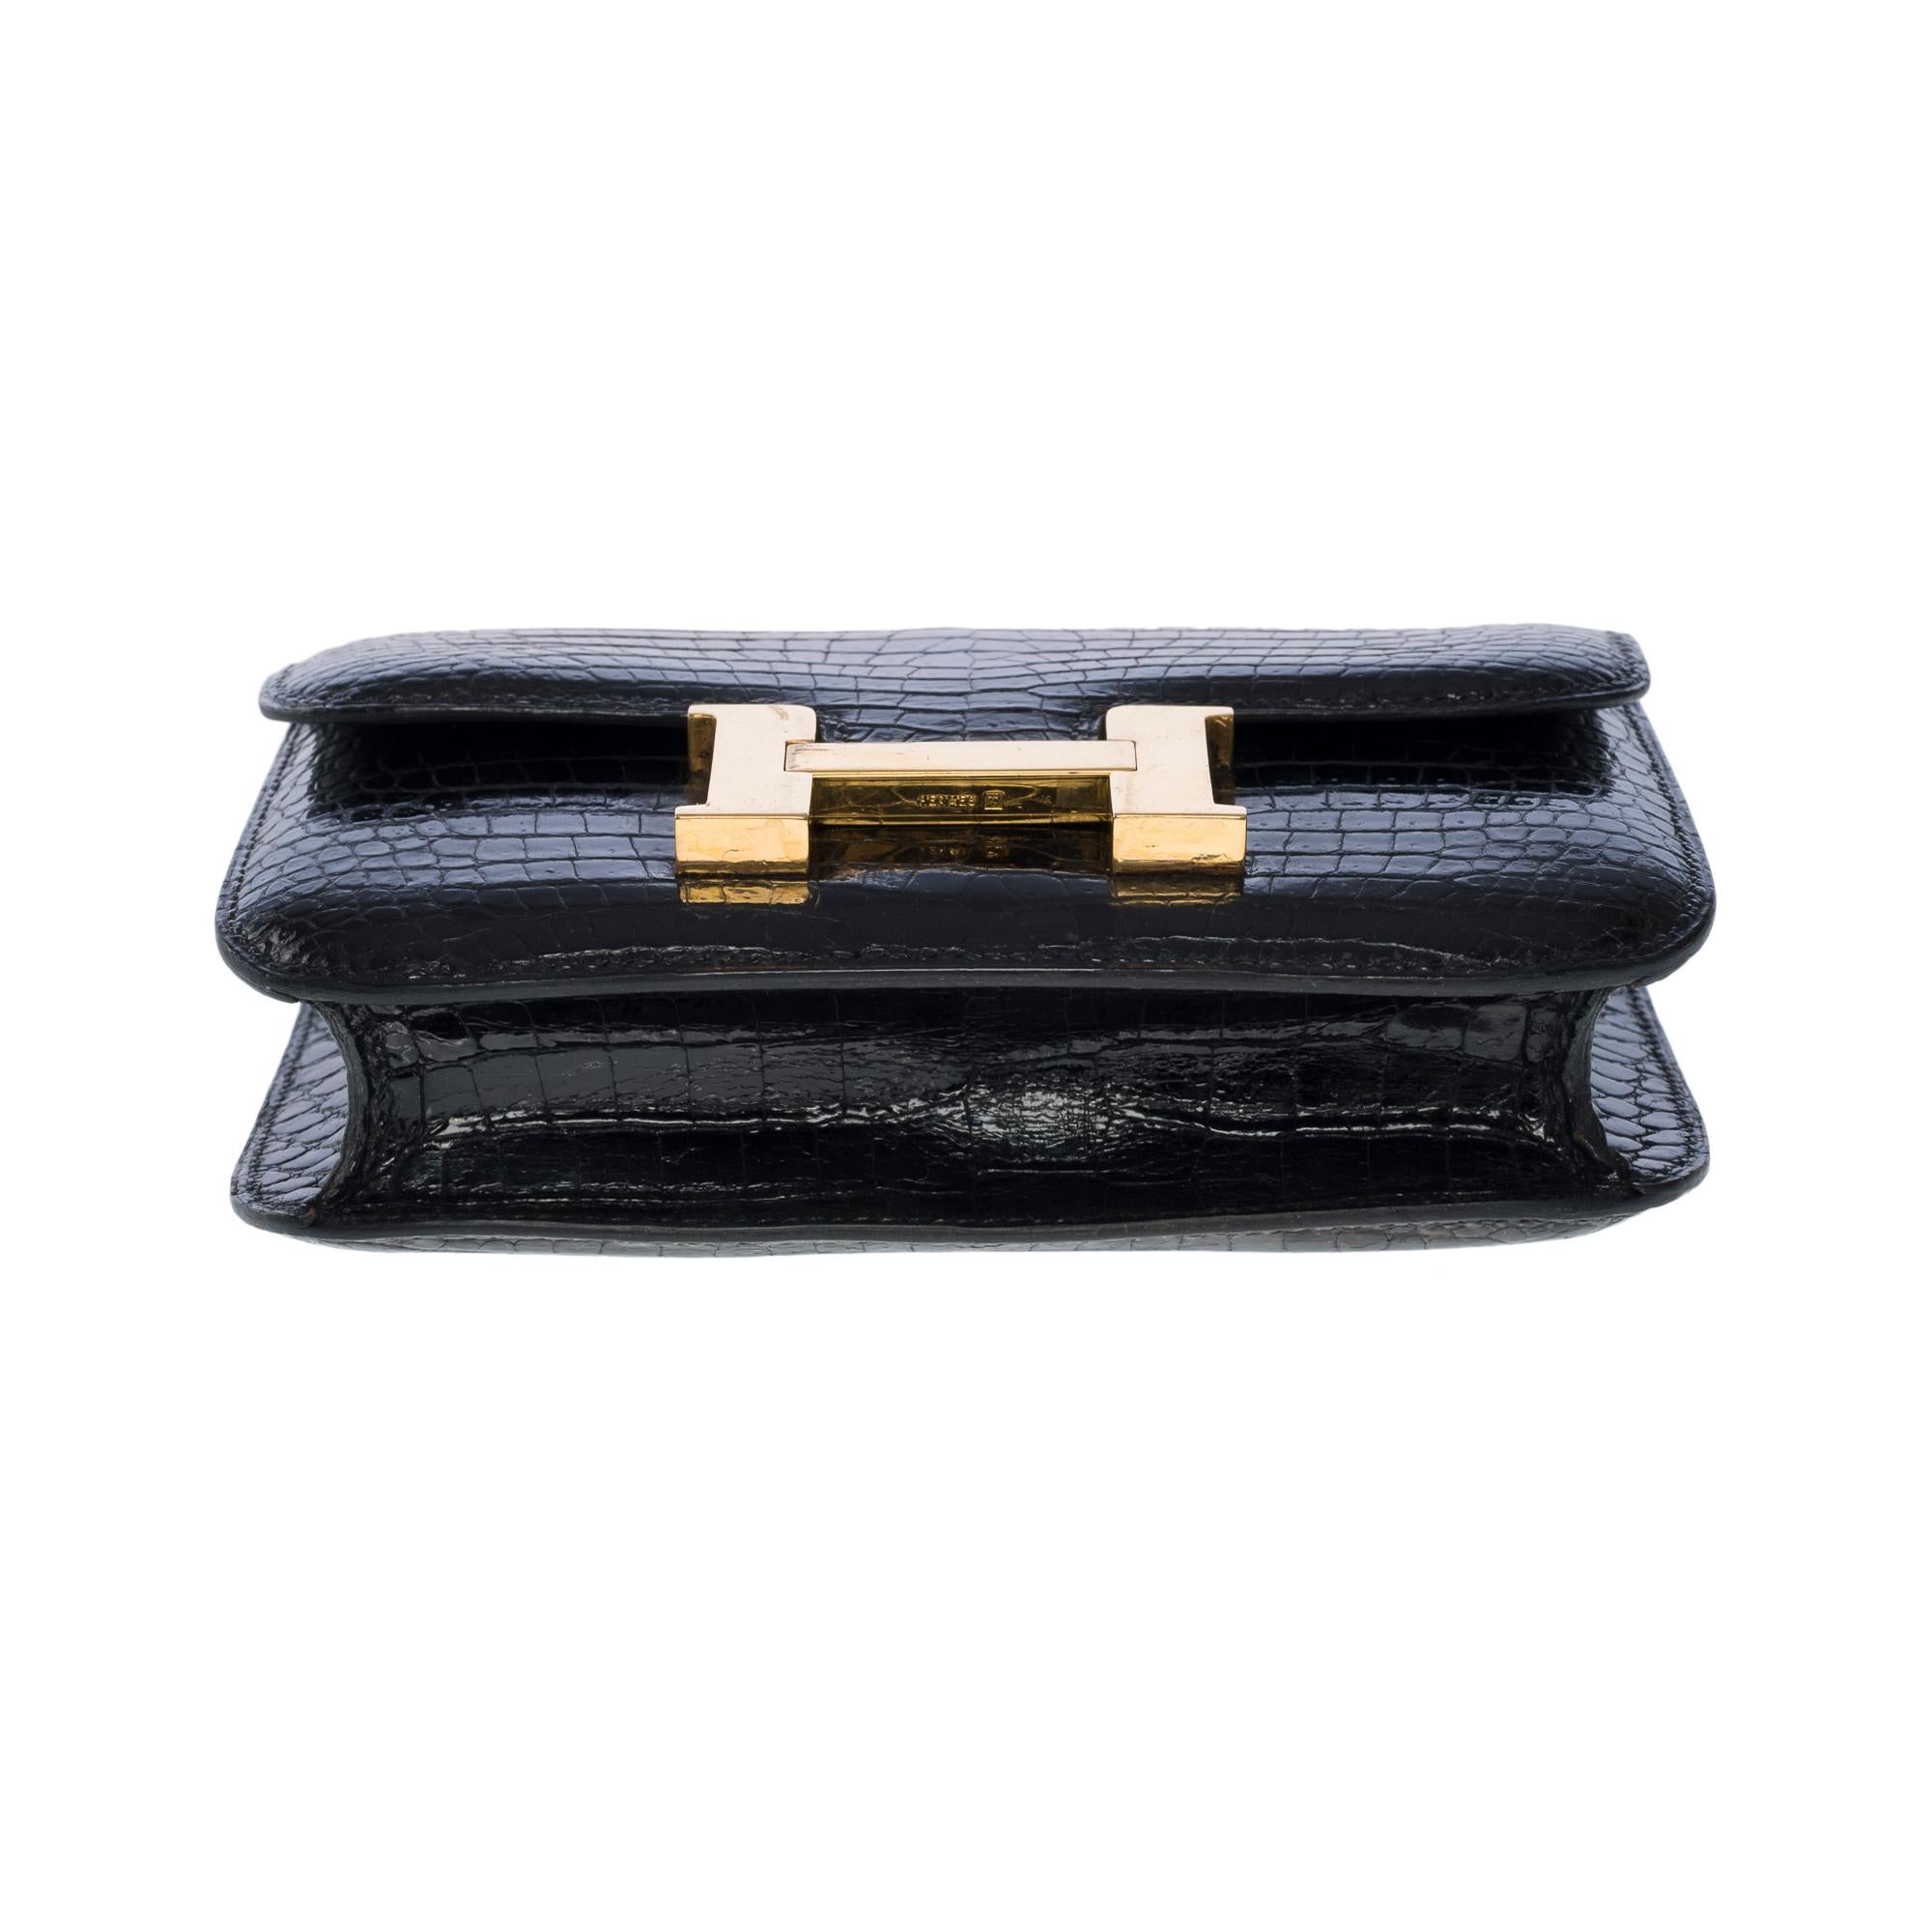 Collector Hermes Constance Micro Clutch flap bag in black Porosus Crocodile, GHW For Sale 3